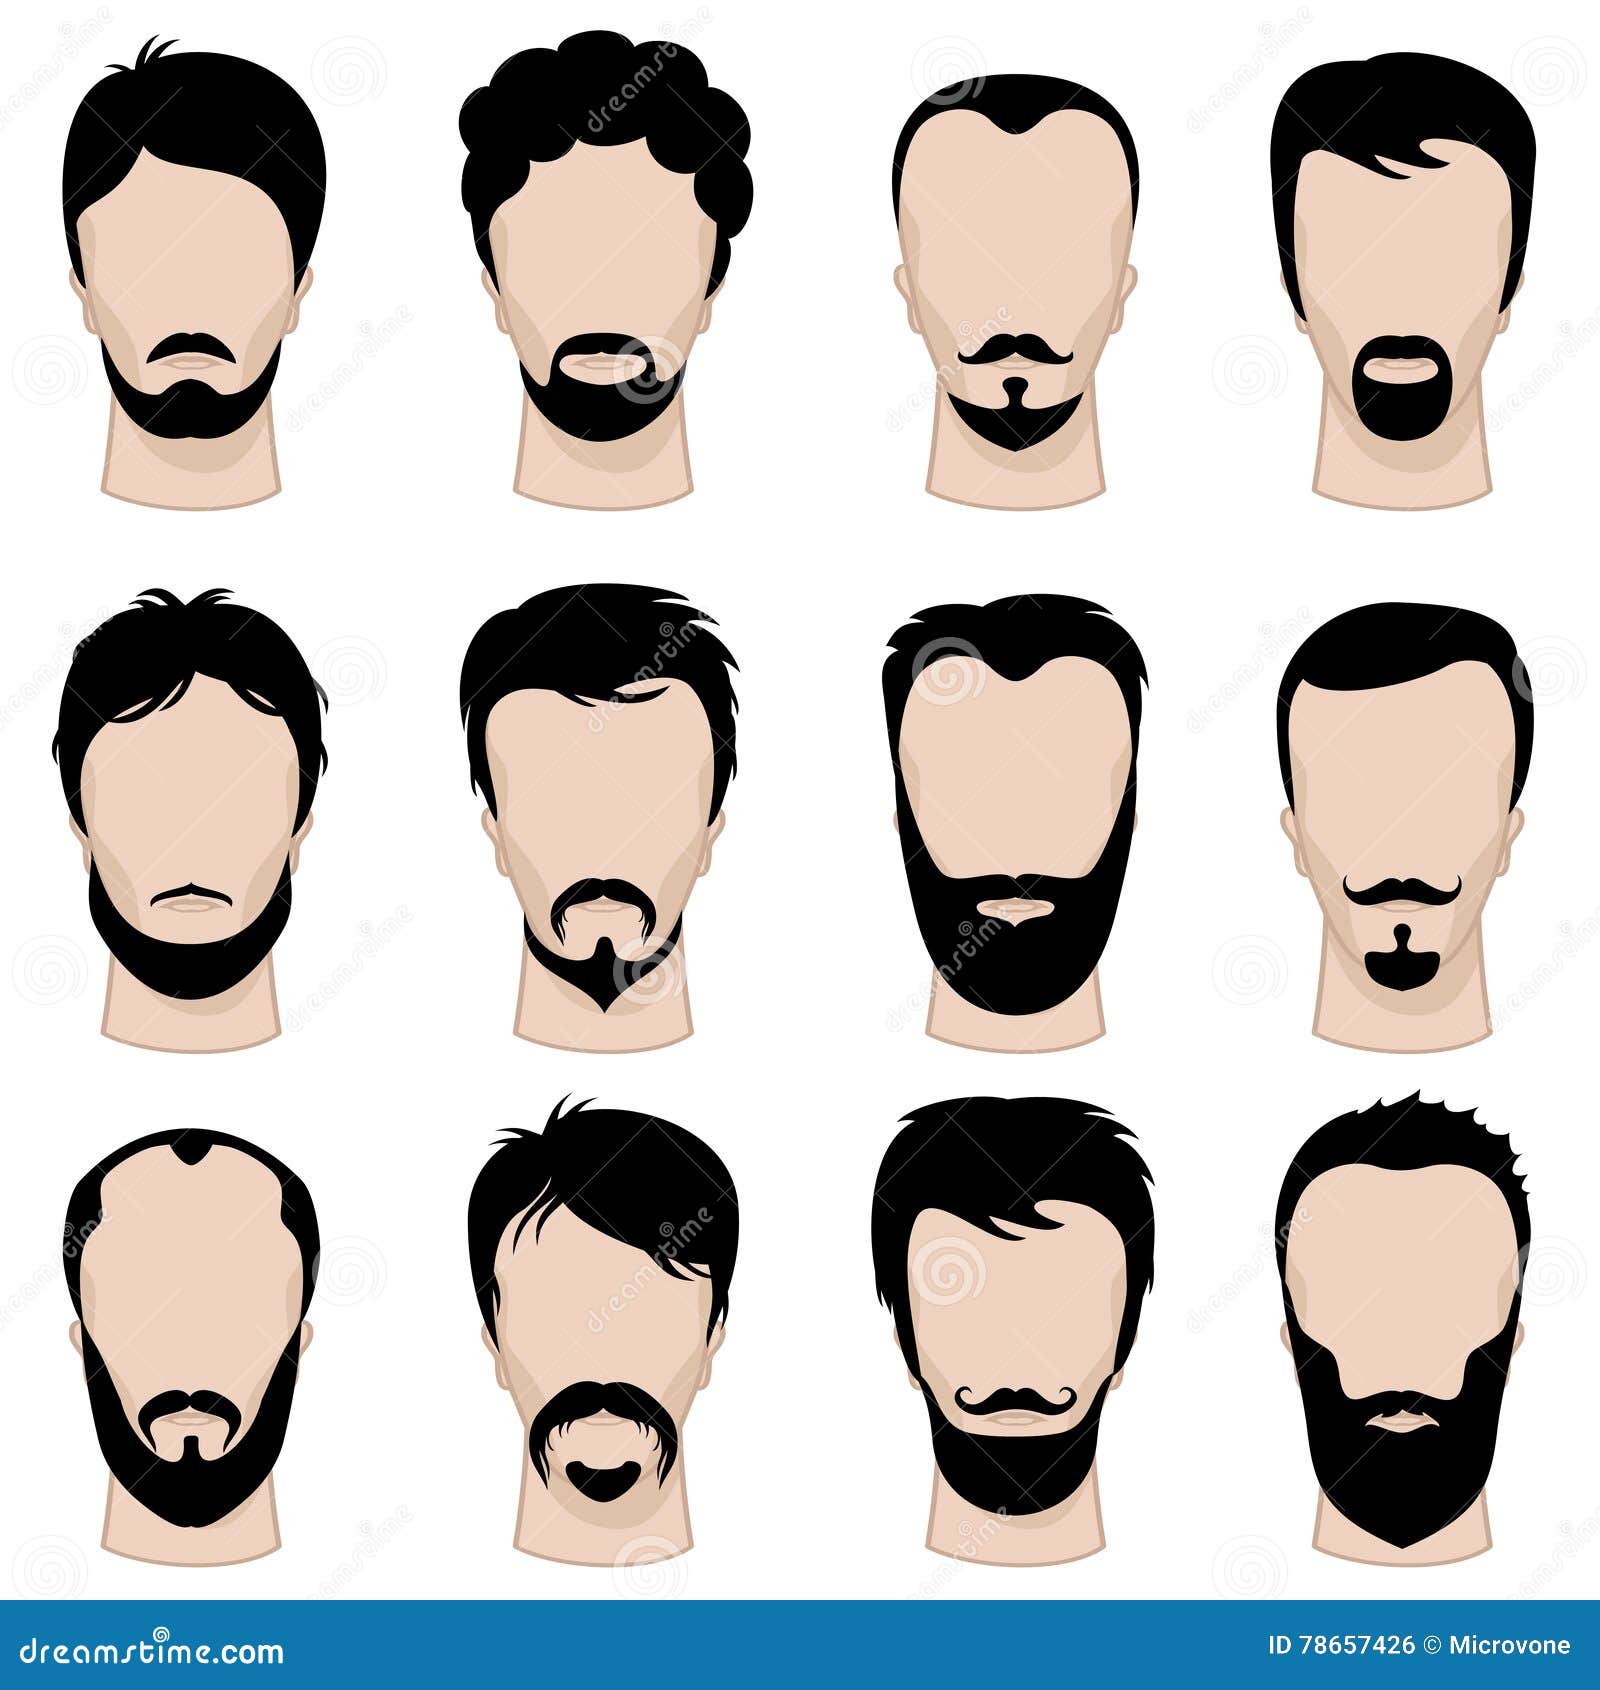 Best Free AI Beard Filters: How to Try 15+ Beard Styles for Free | PERFECT